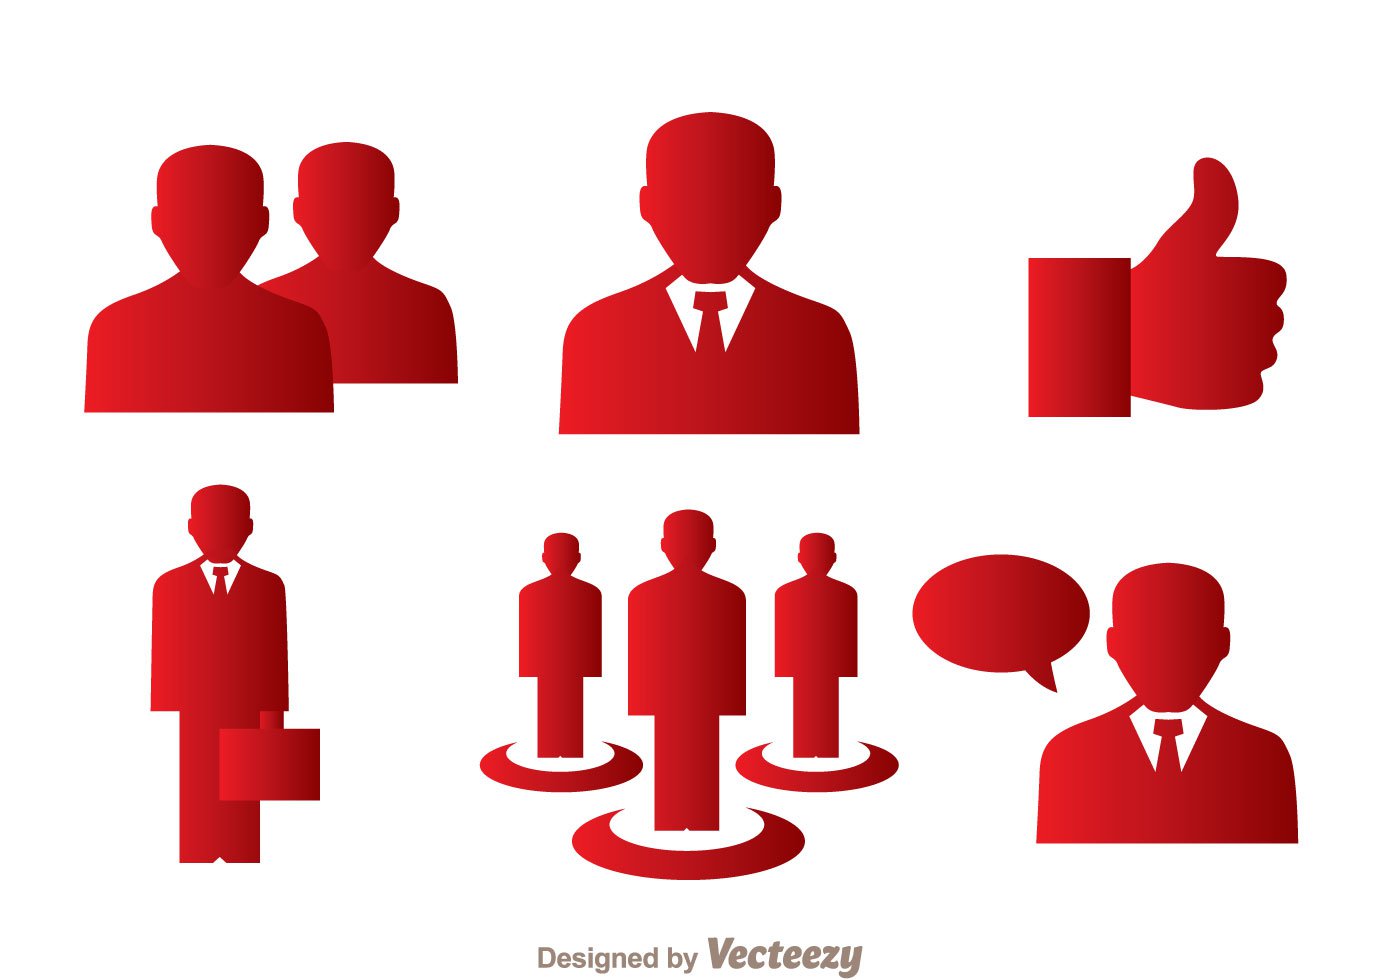 People Icon Free Vector Art - (19795 Free Downloads)